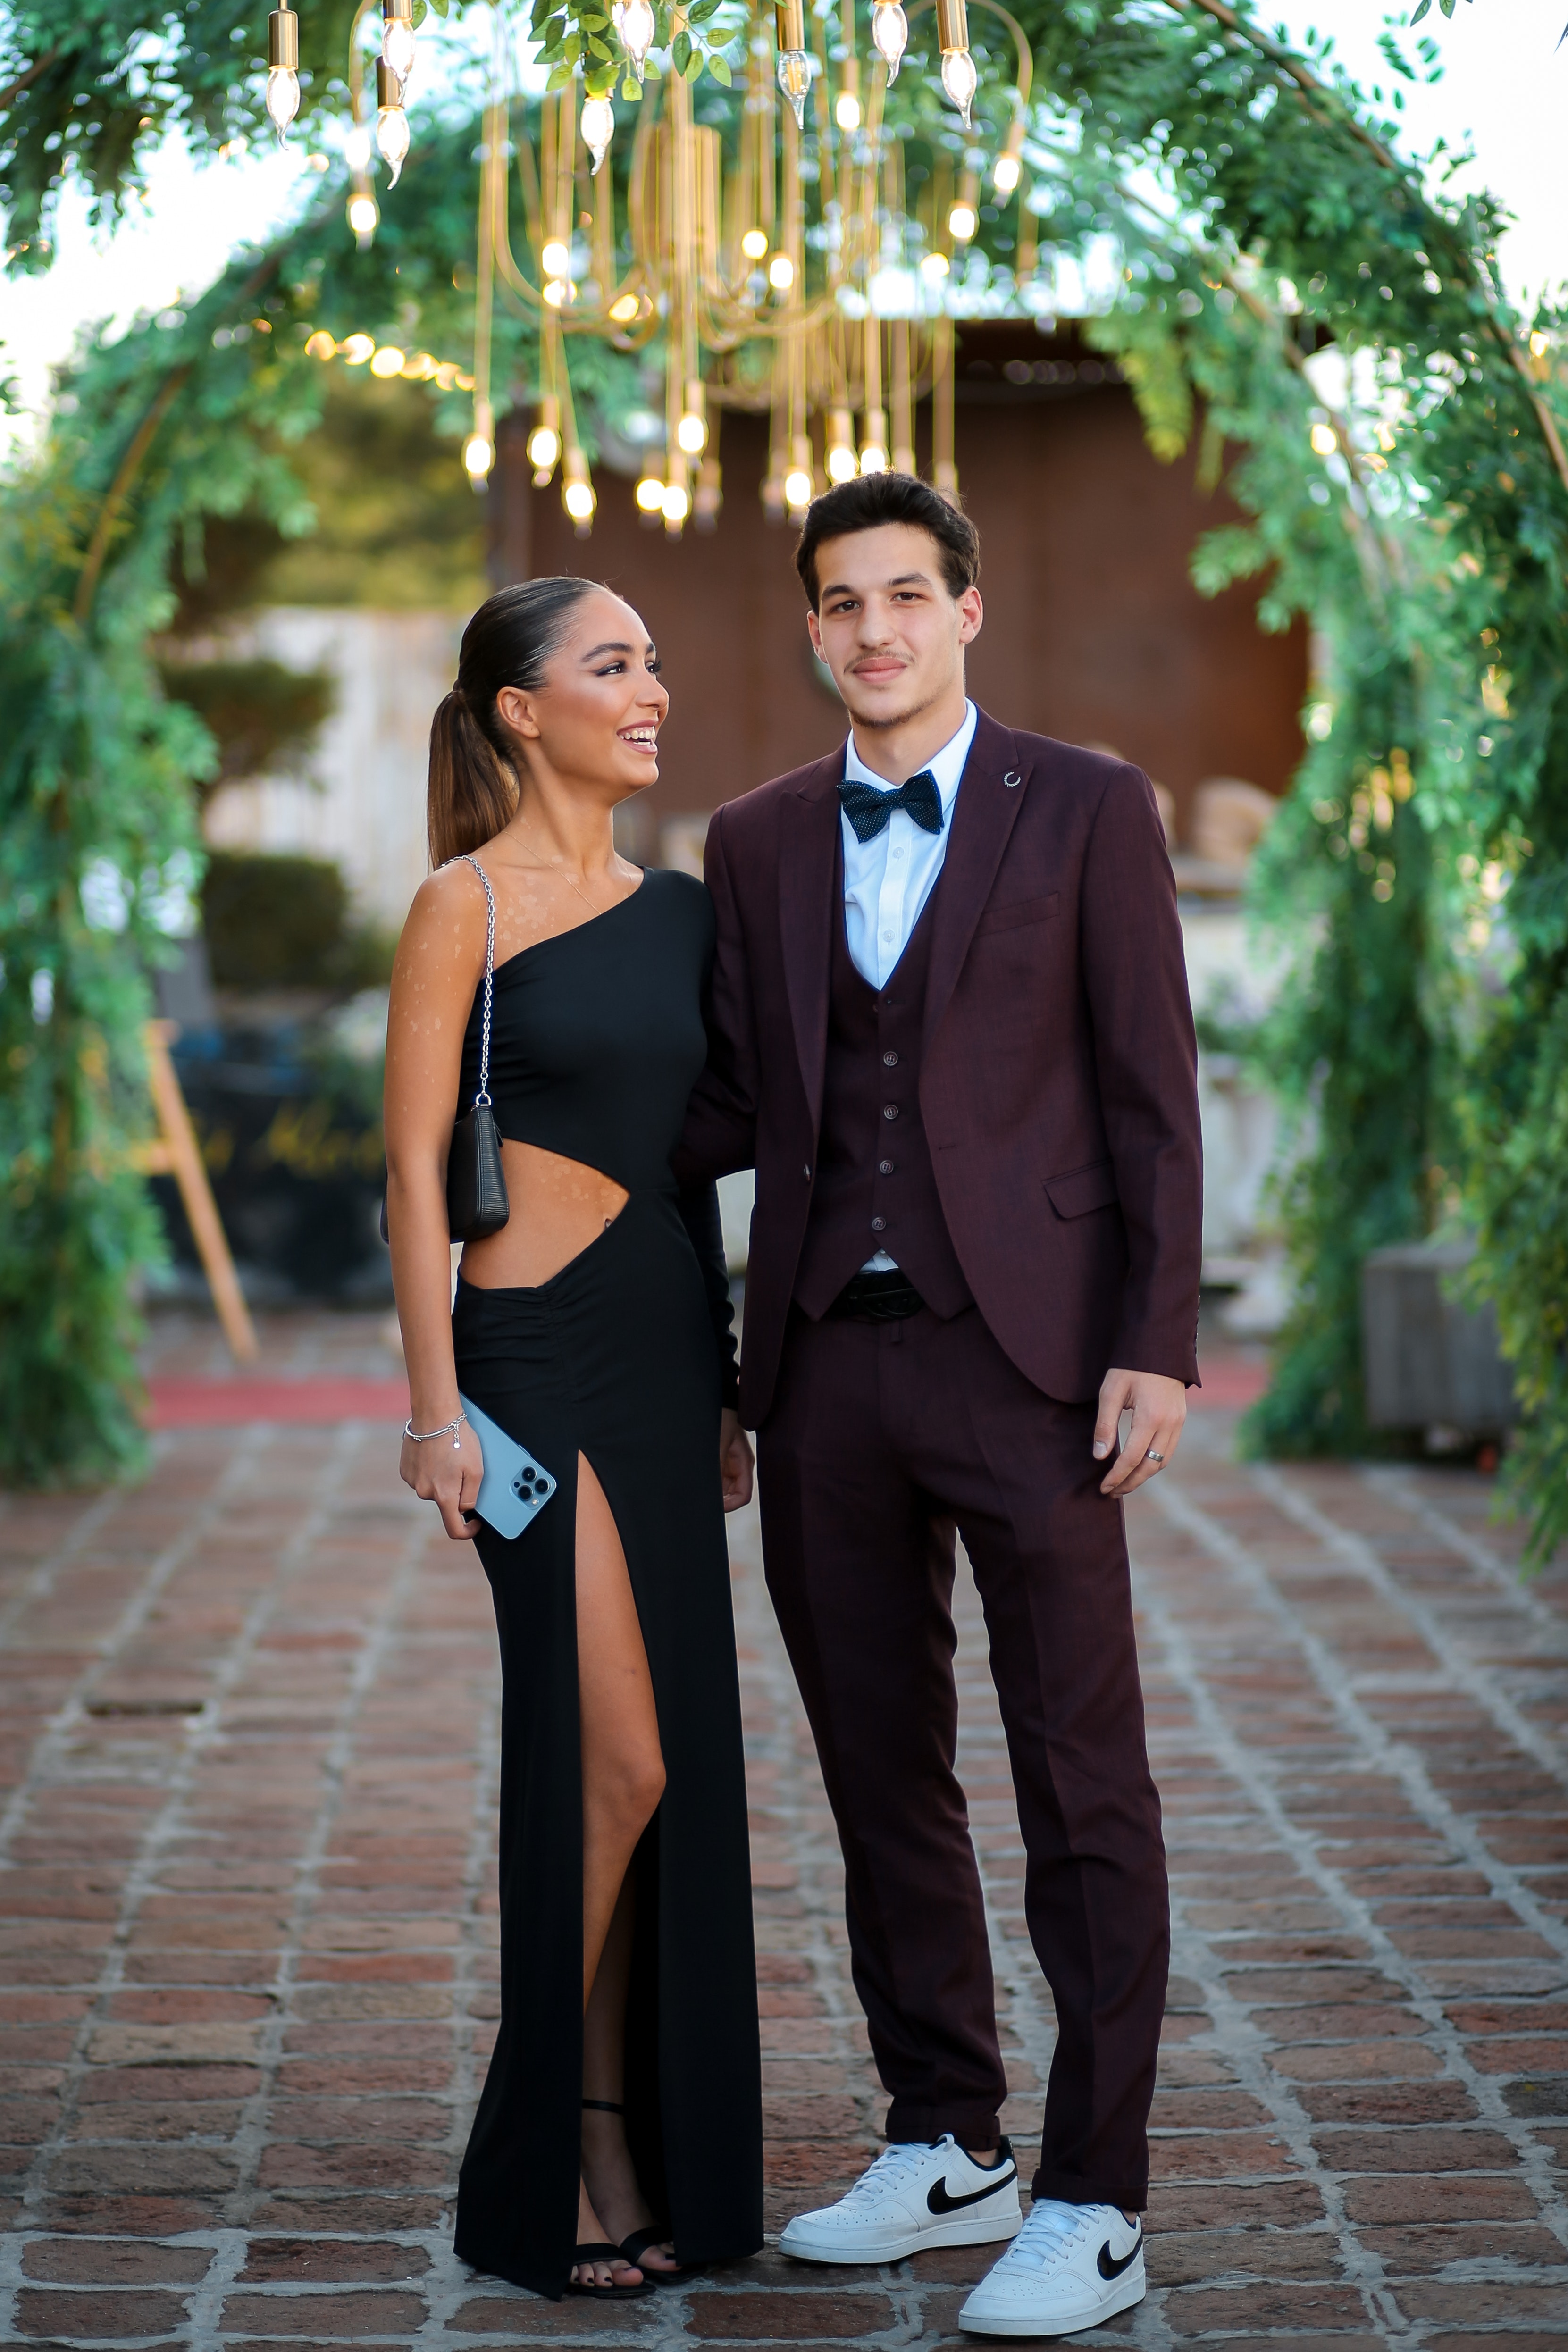 A couple dressed in formal clothing. | Source: Pexels